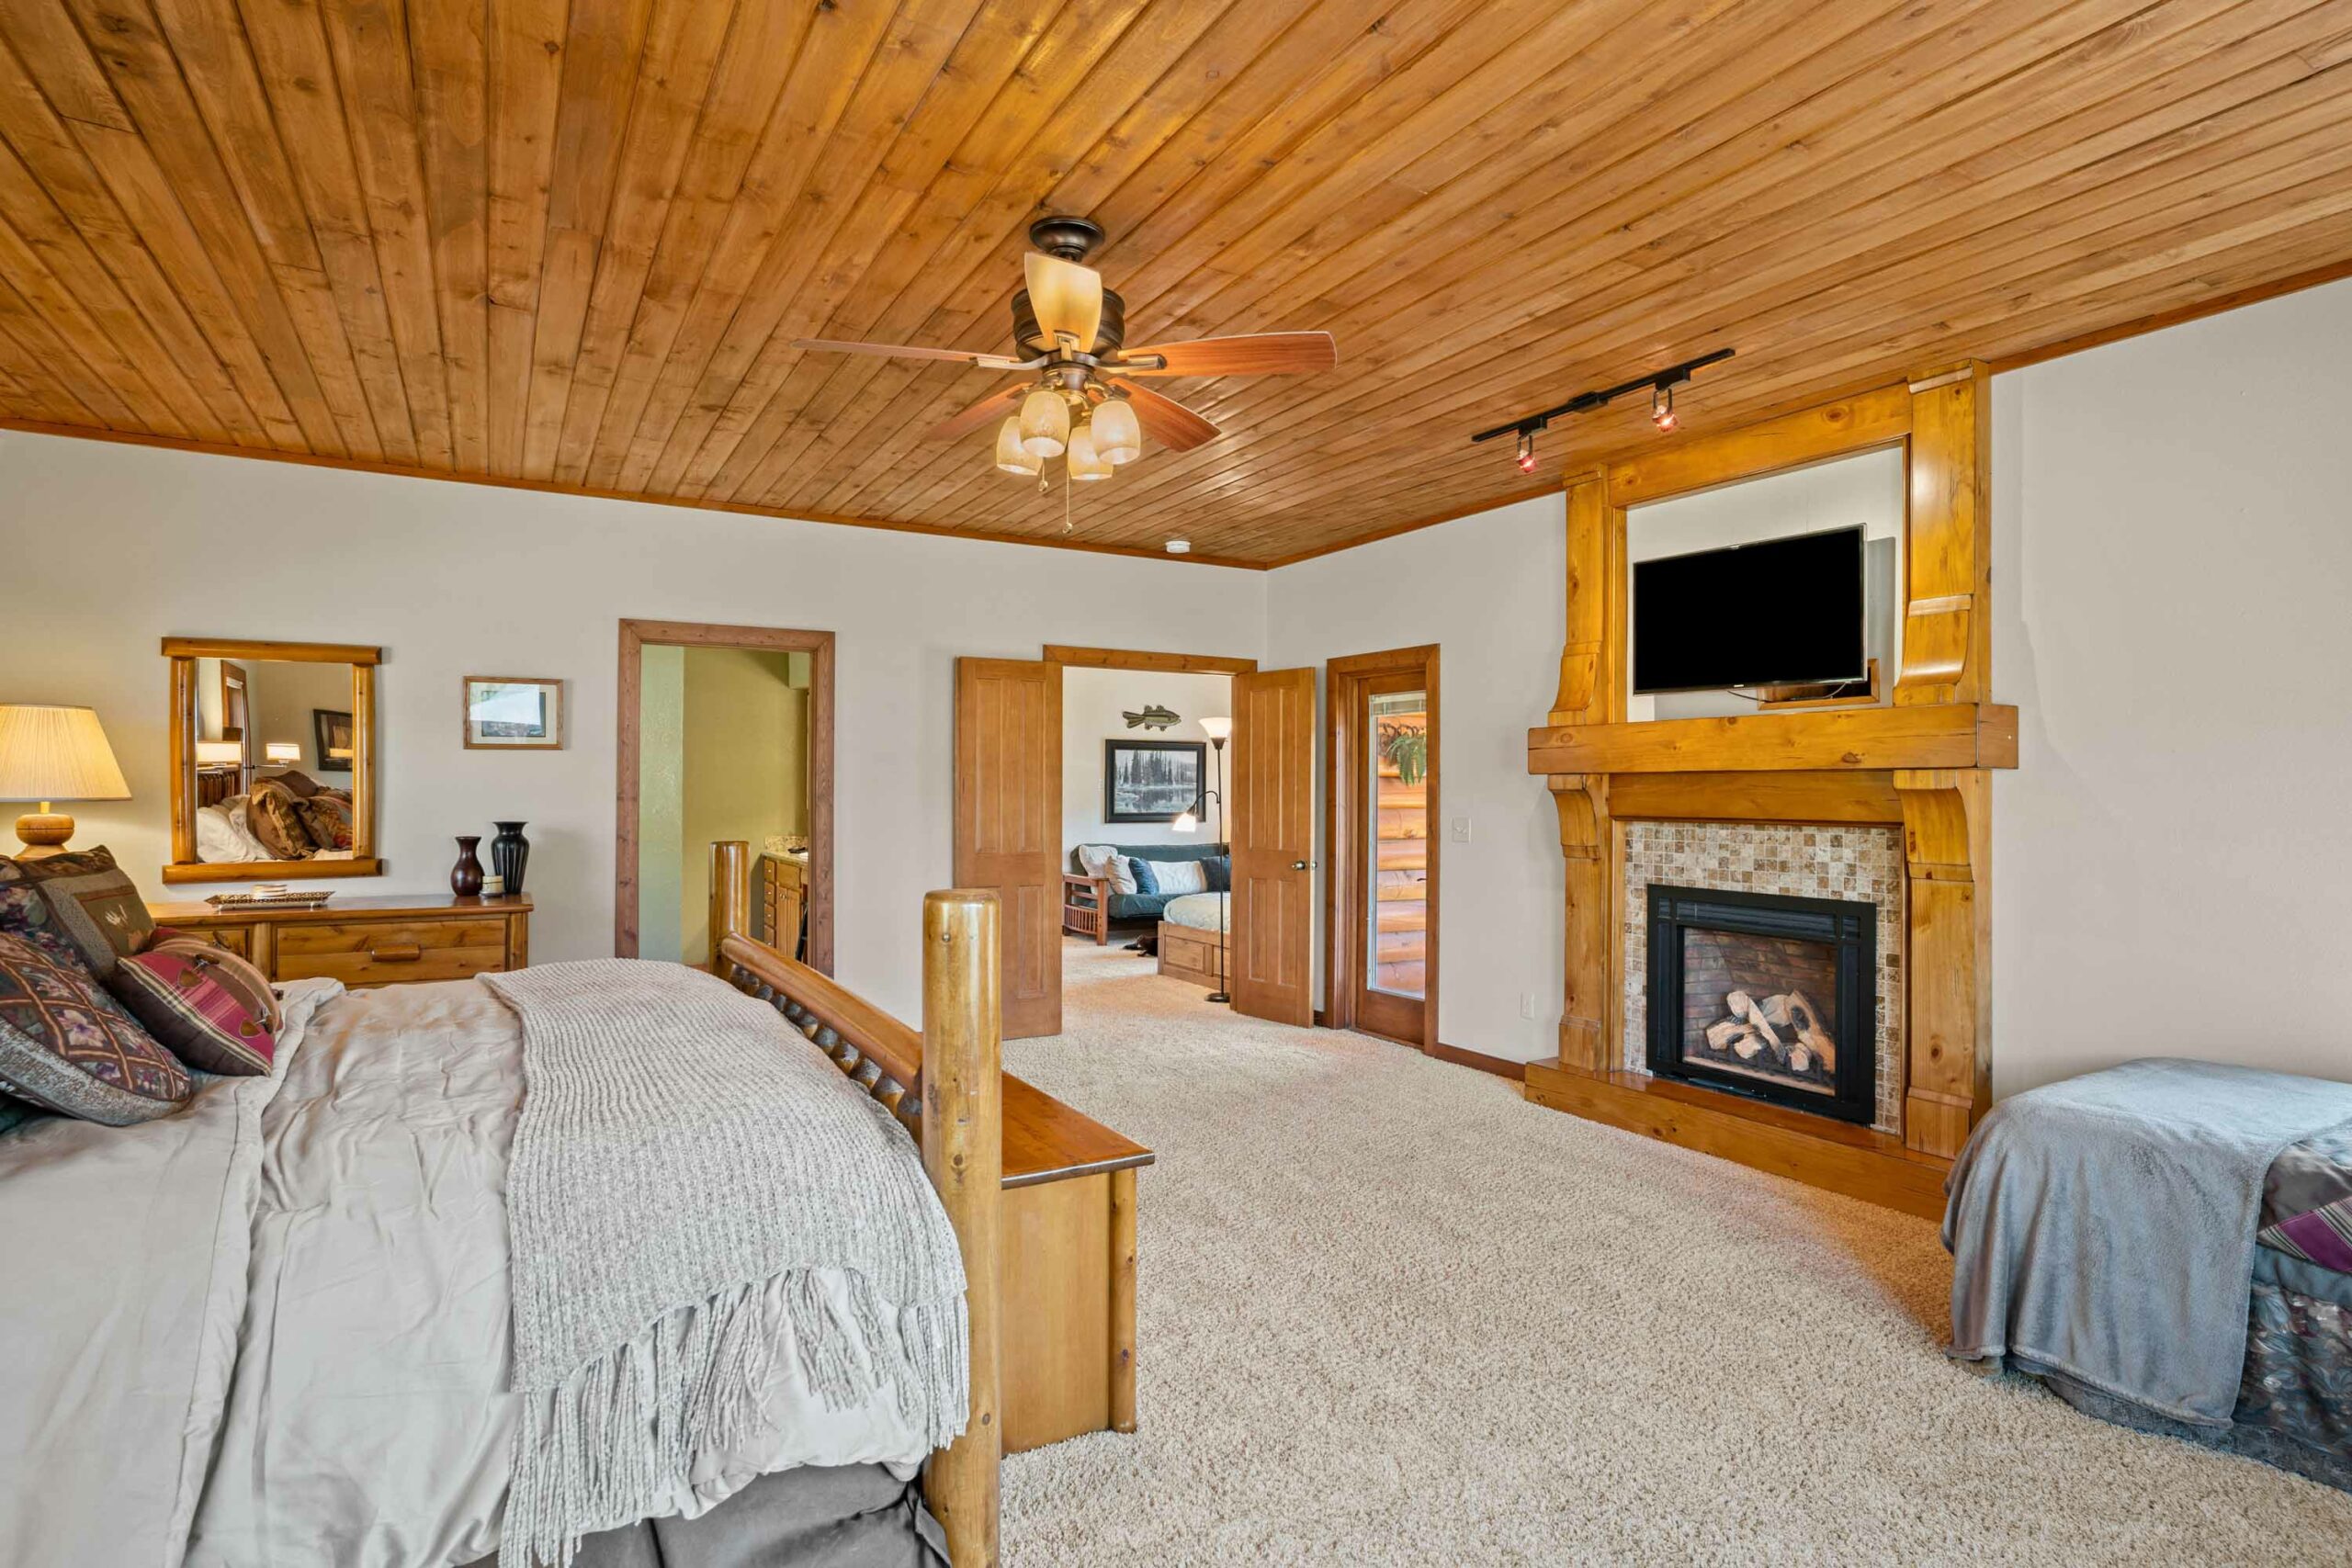 45 Creek Cove Crested Butte, CO - Primary Bedroom 1